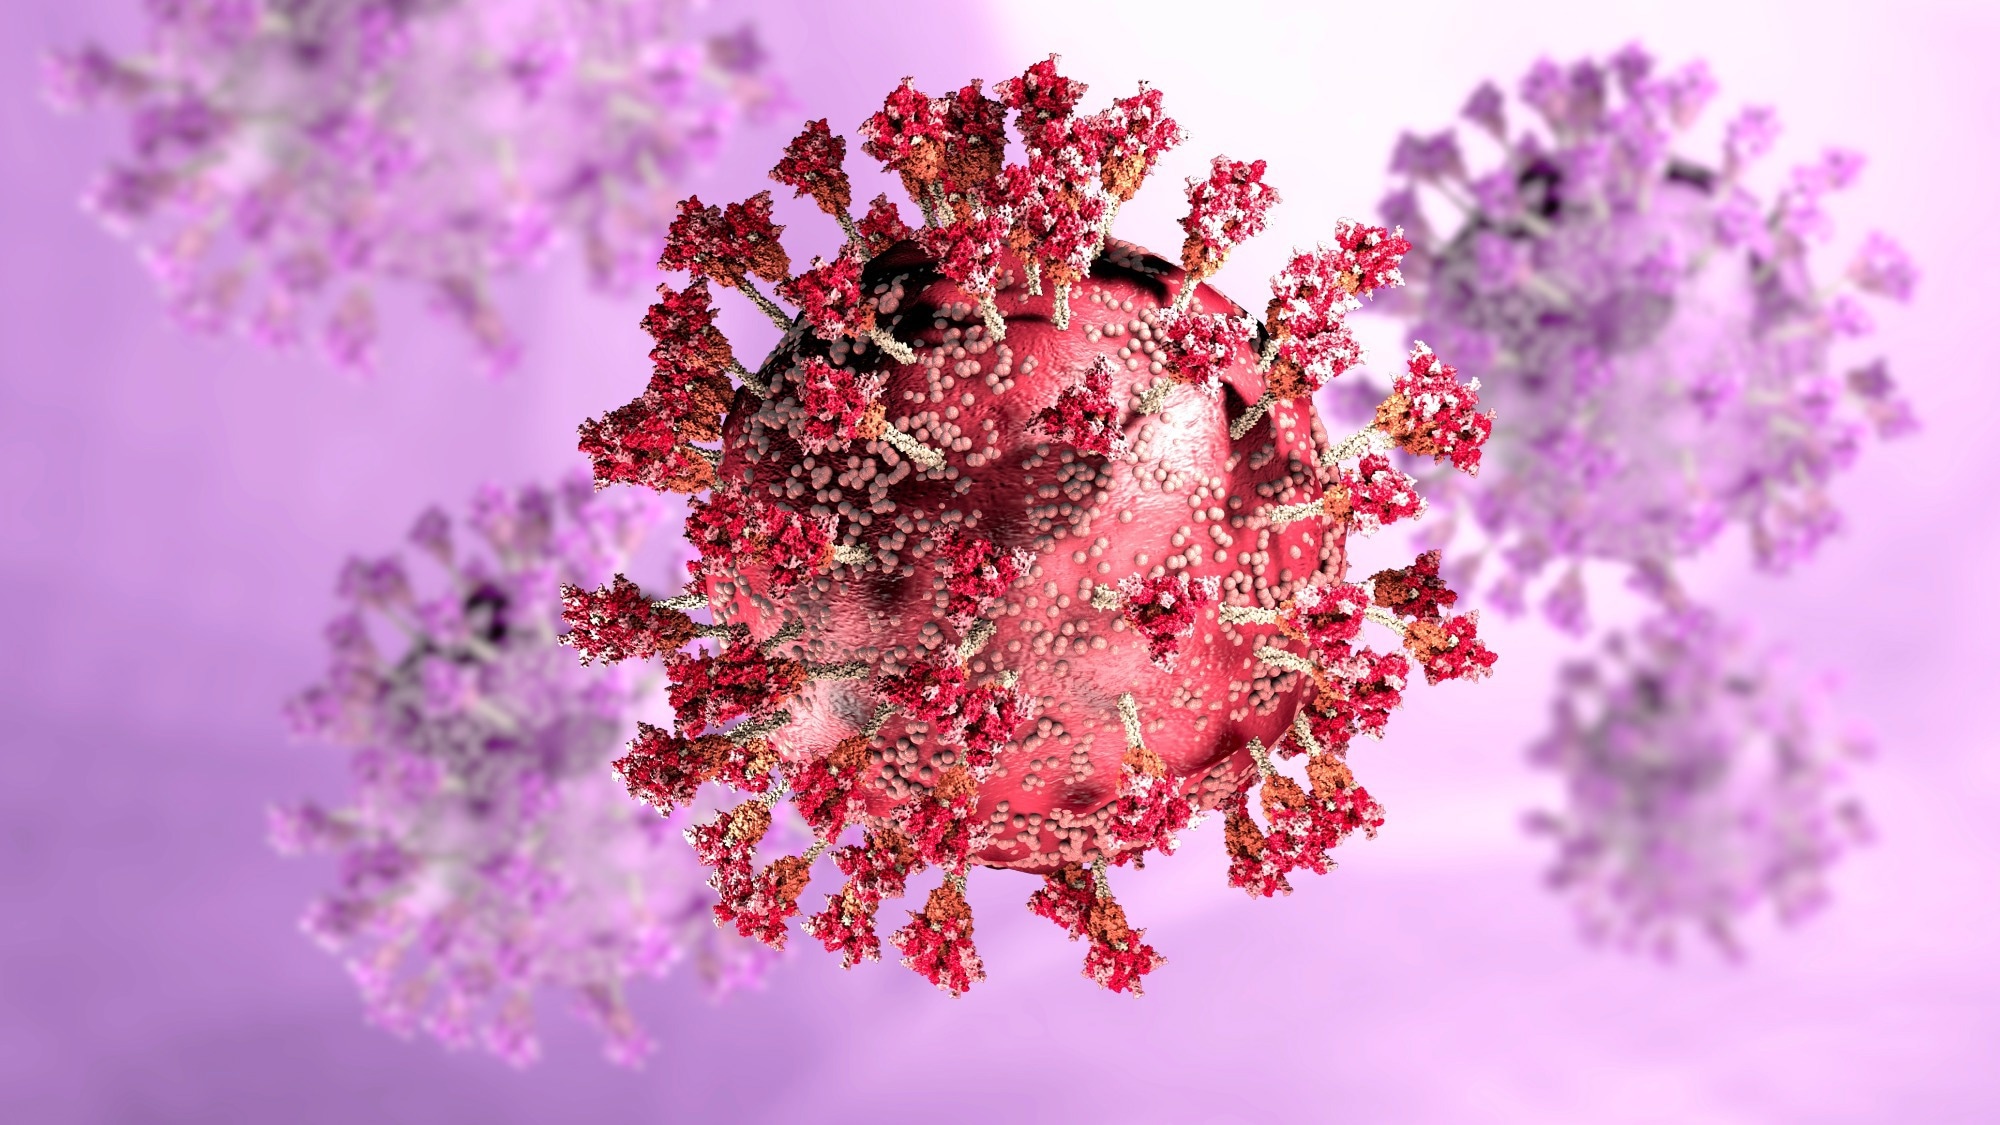 Study: Immune responses in COVID-19 patients during breakthrough infection with SARS-CoV-2 variants Delta, Omicron-BA.1 and Omicron-BA.5. Image Credit: Naeblys/Shutterstock.com